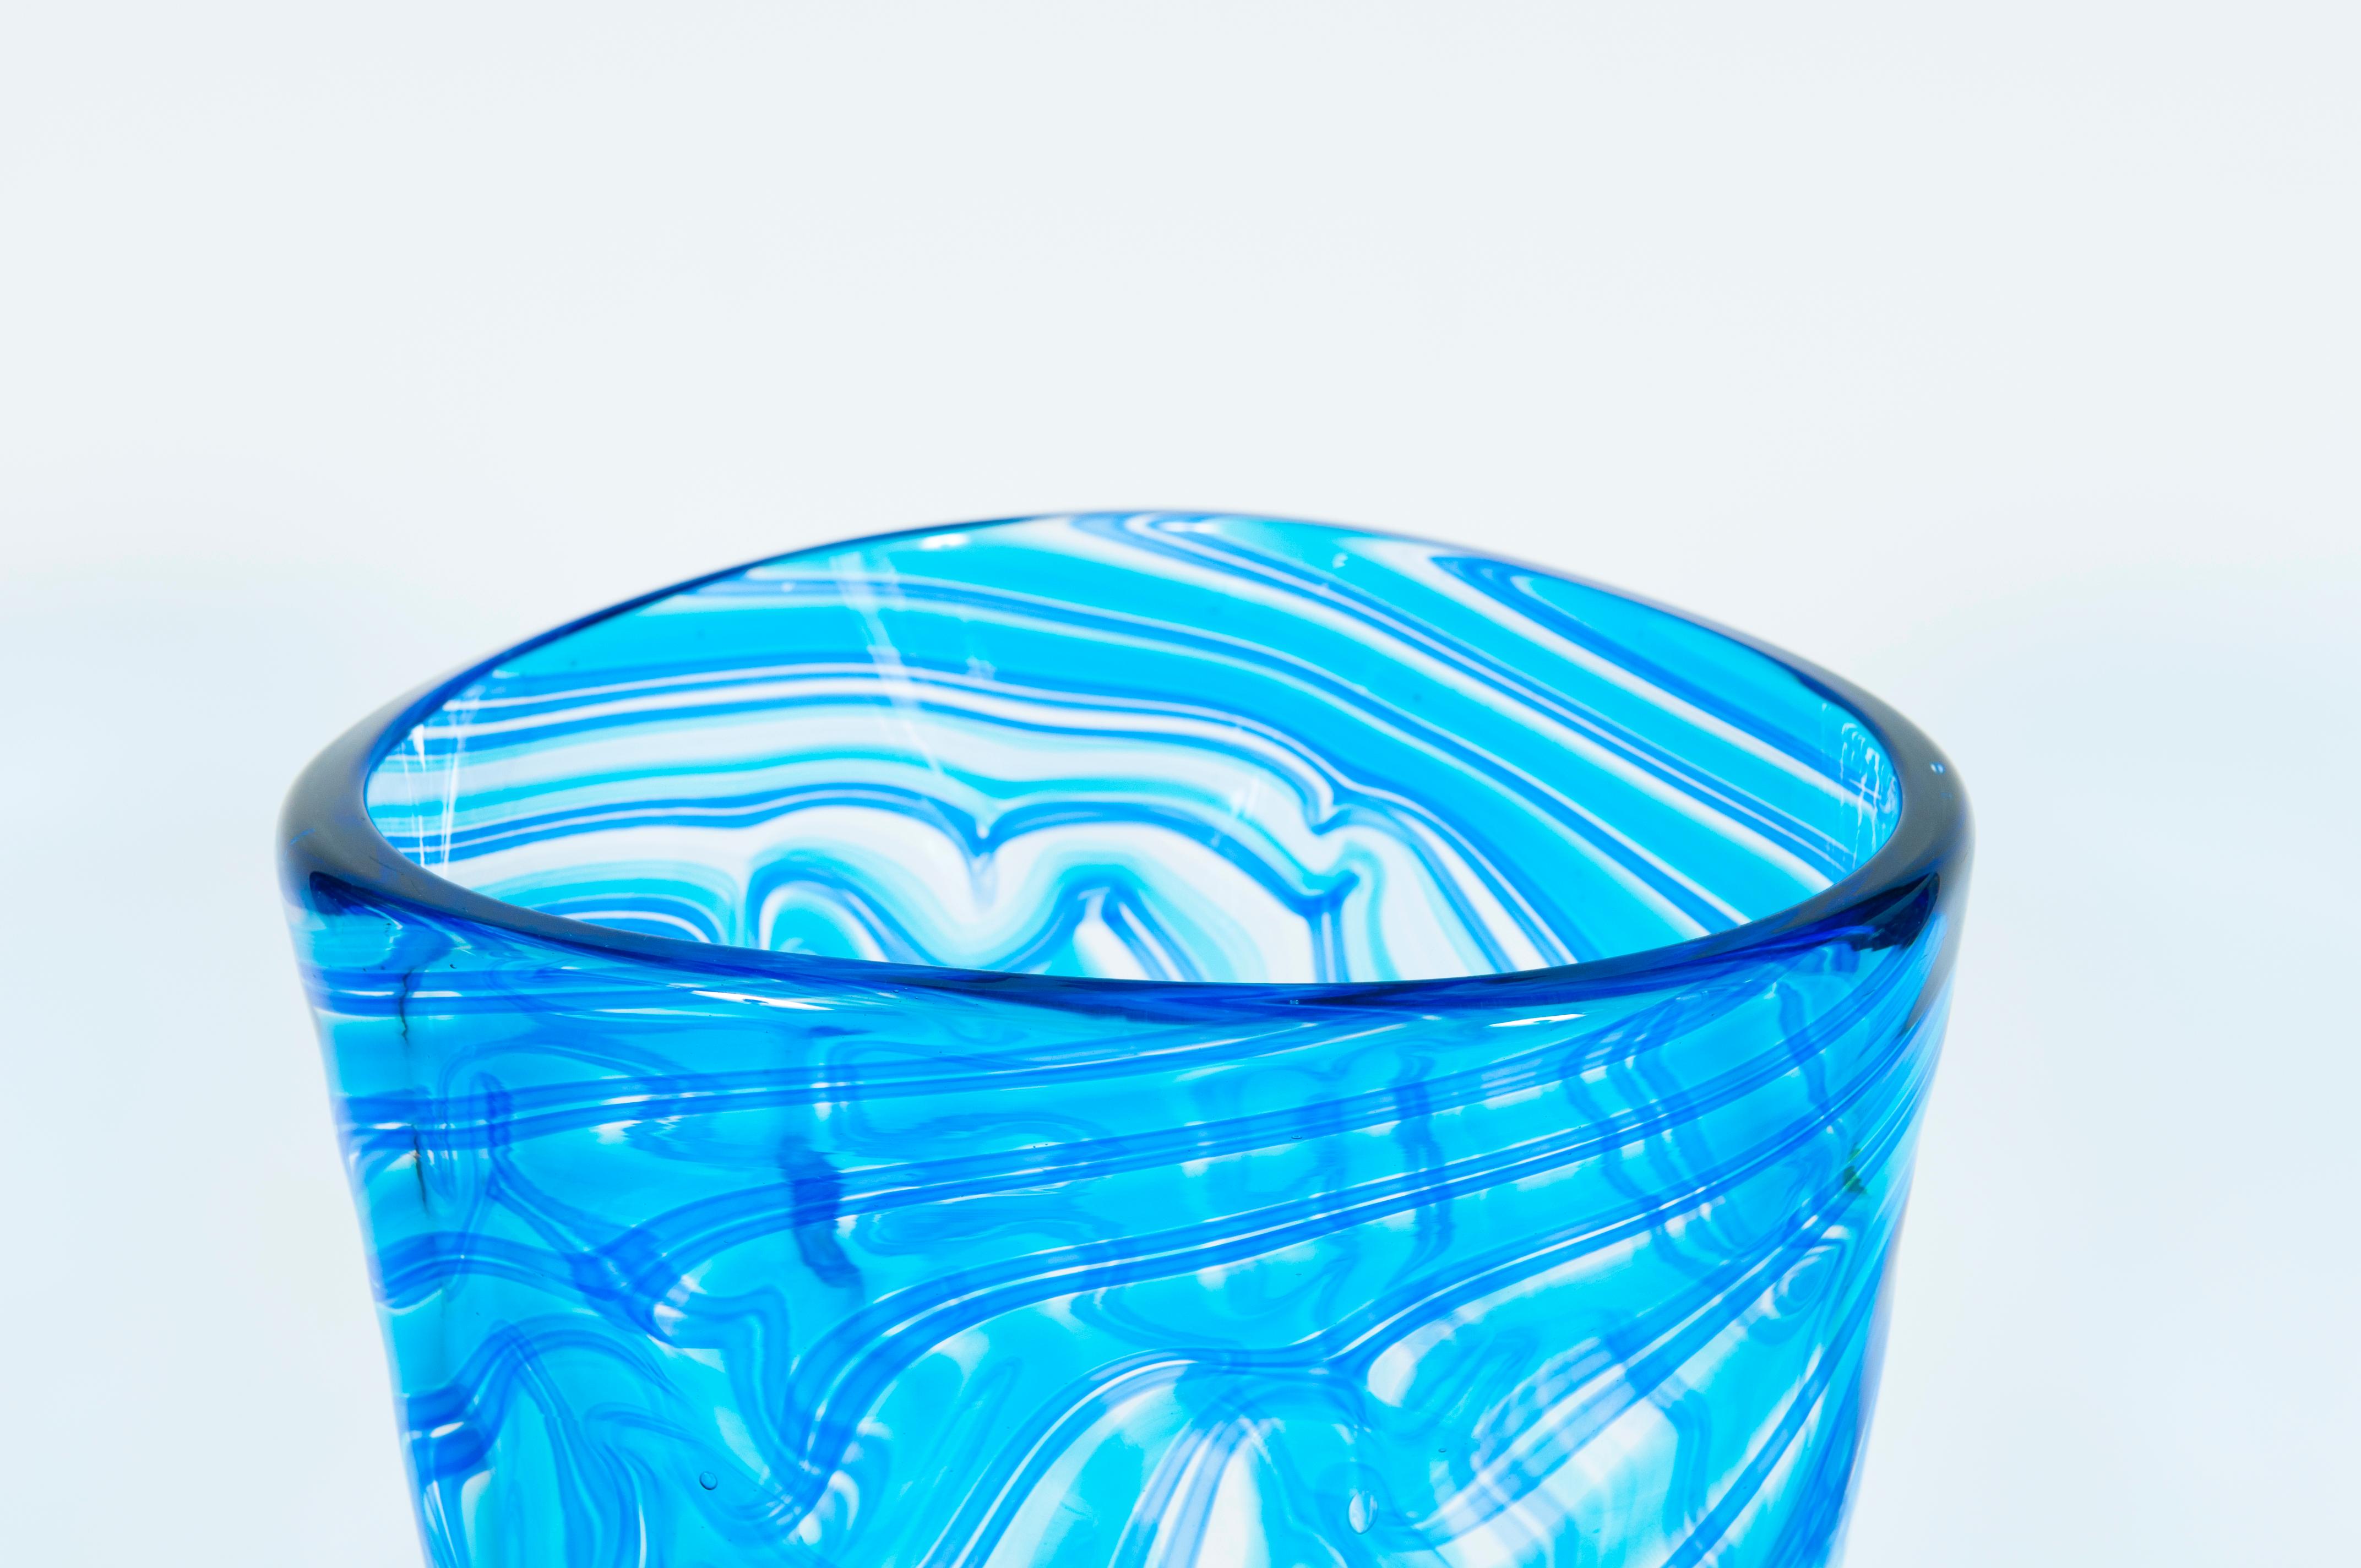 Pair of Twisted Vases in Blown Murano Glass Blue Color with Waves Pattern, Italy 2